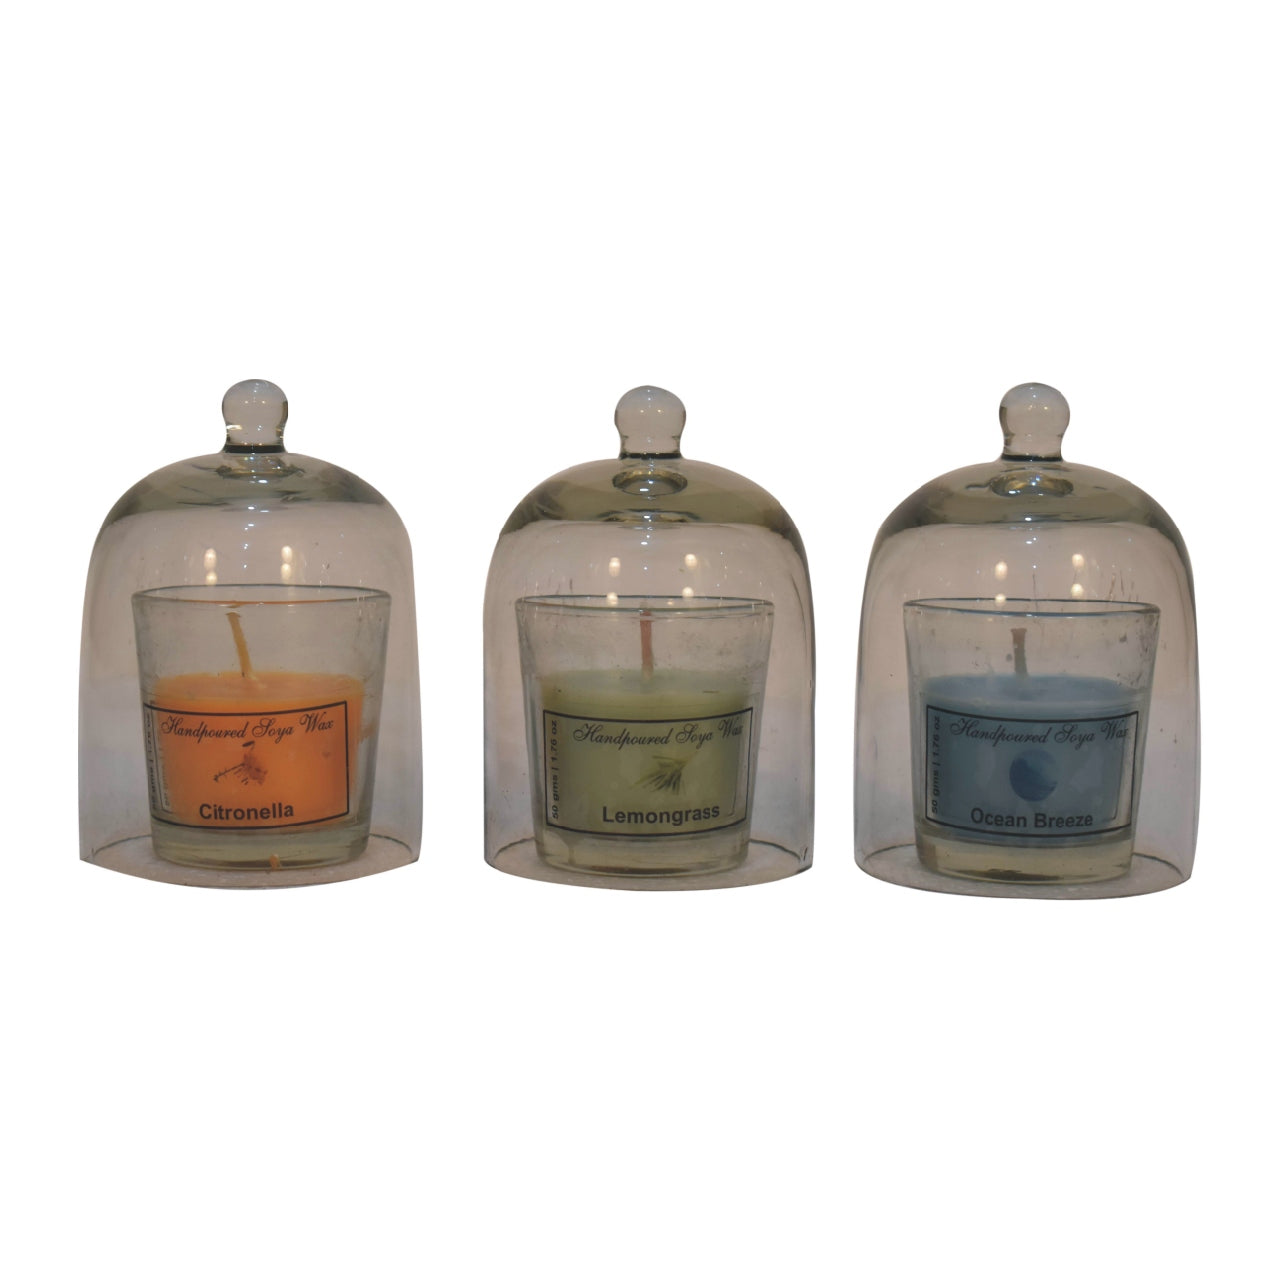 View Round Candle Set of 3 Citronella Lemongrass Summer Tides information